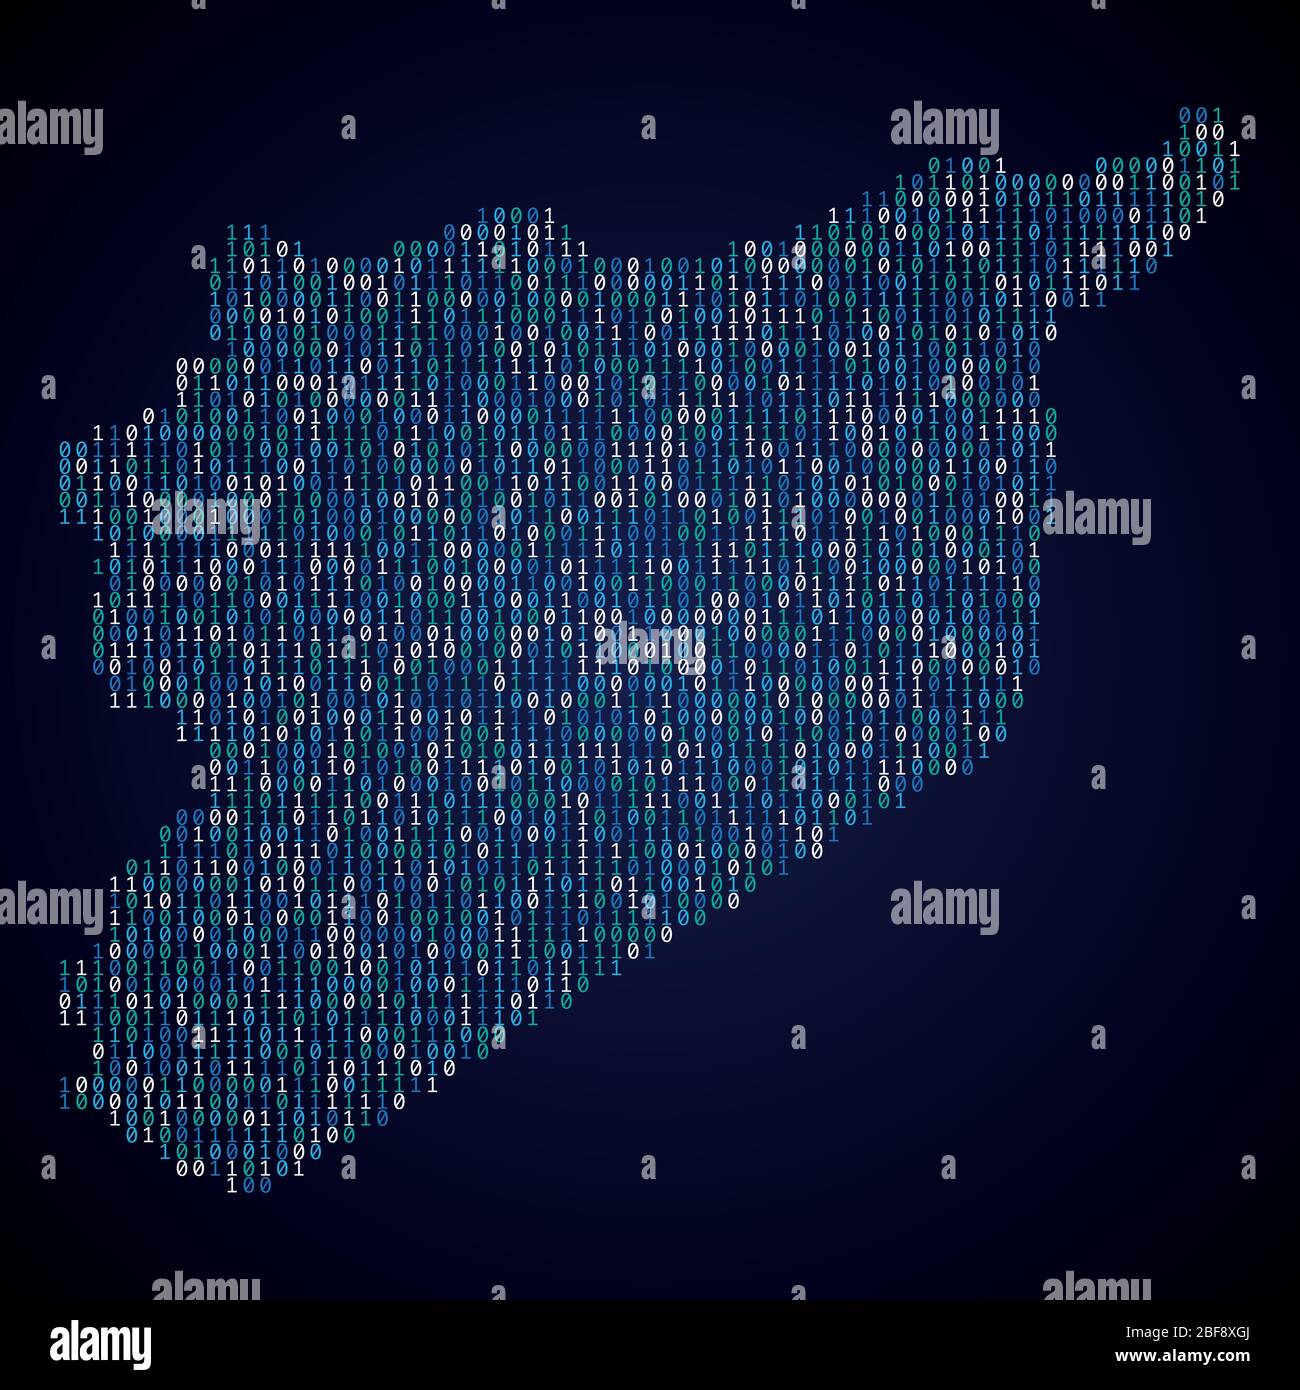 Syria country map made from digital binary code Stock Vector